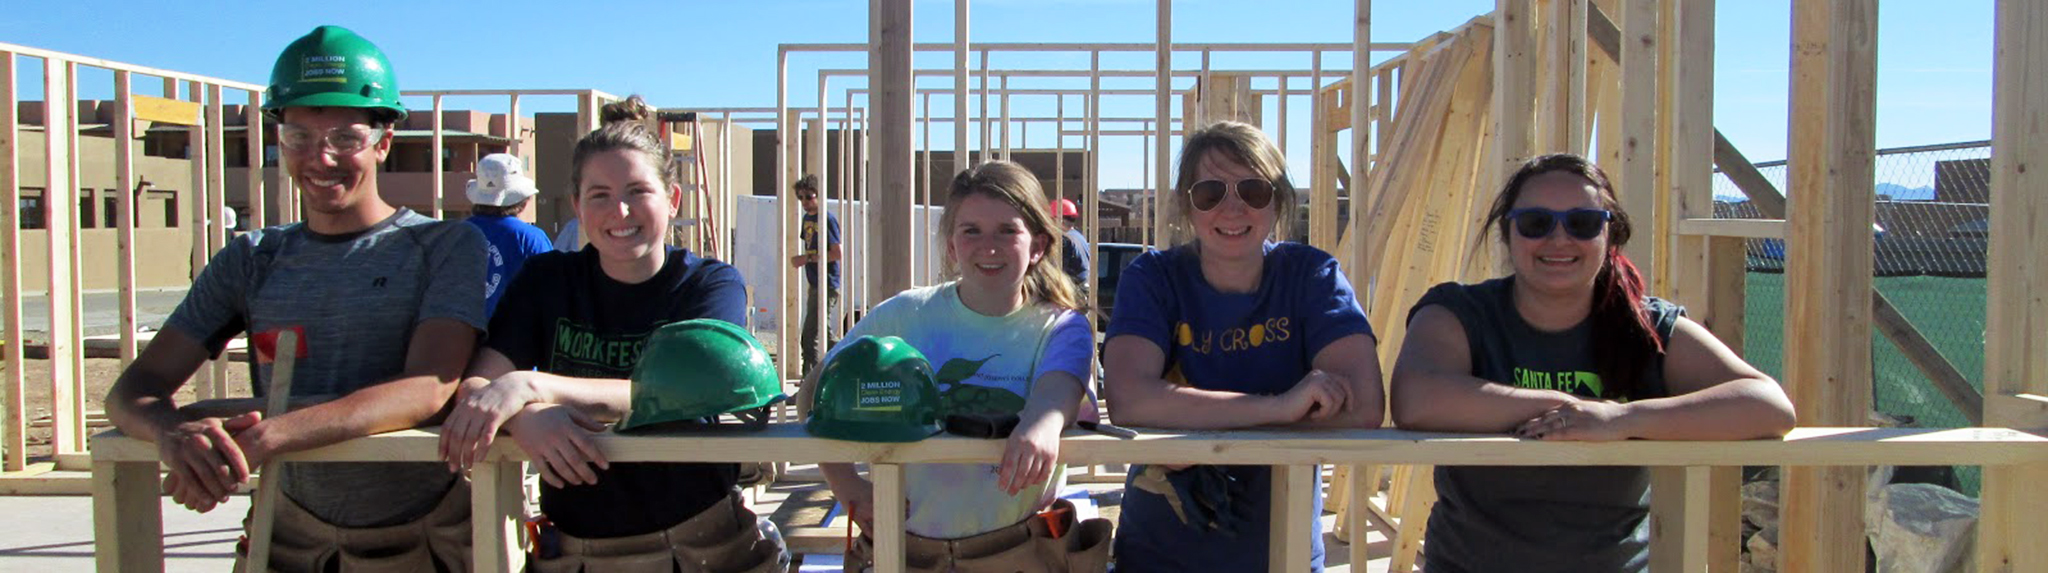 Students building a home during spring break workfest